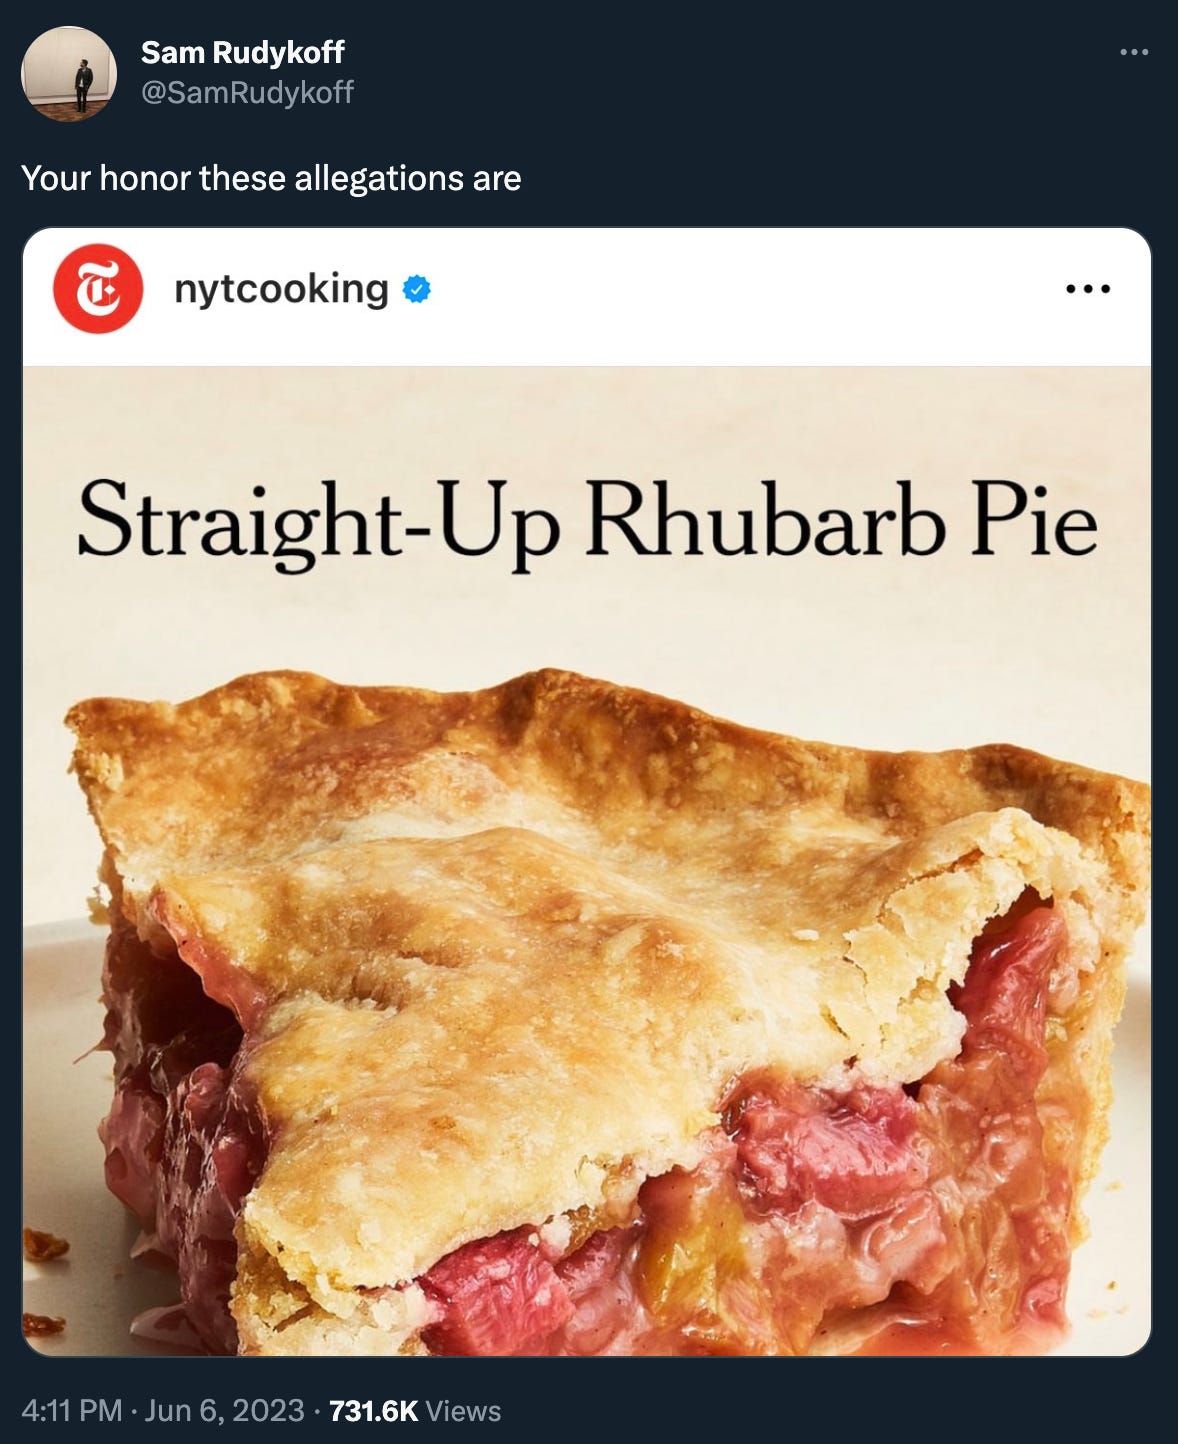 Tweet by Sam Rudykoff: “Your honor these allegations are” [screenshot from nytcooking headlined] “Straight-Up Rhubarb Pie”